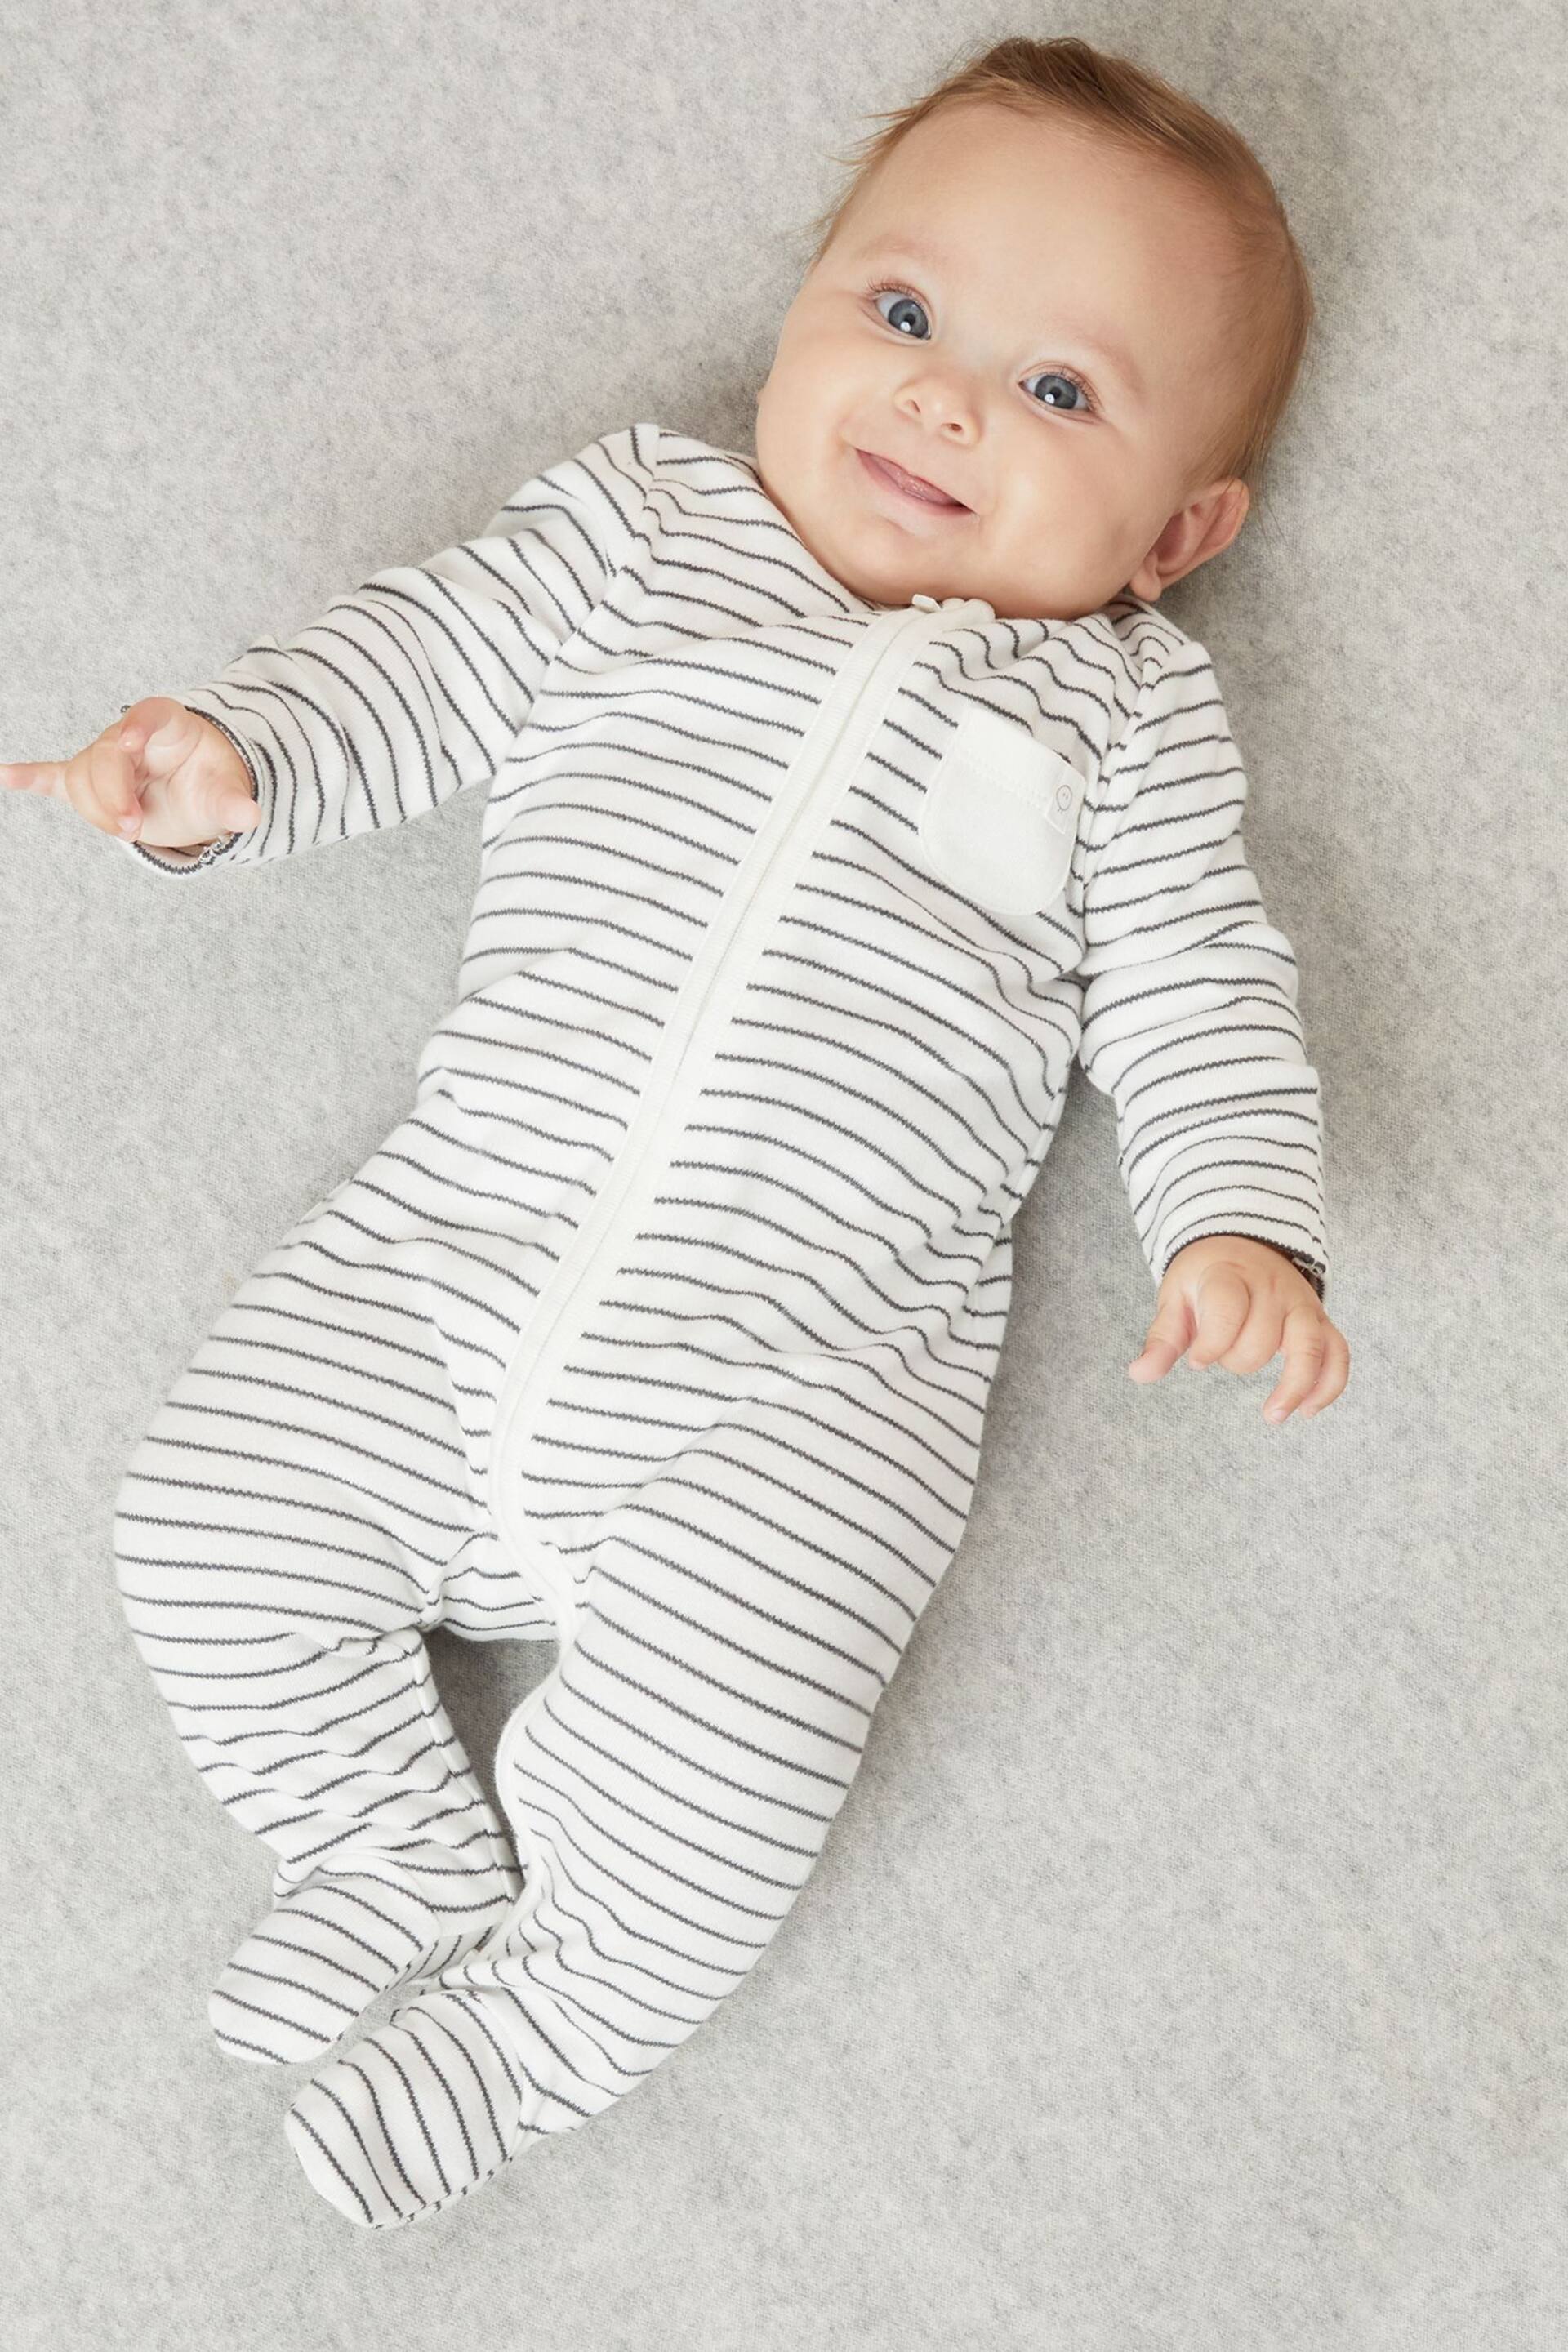 Mori Organic Cotton & Bamboo Clever Zip Up Sleepsuit - Image 1 of 4